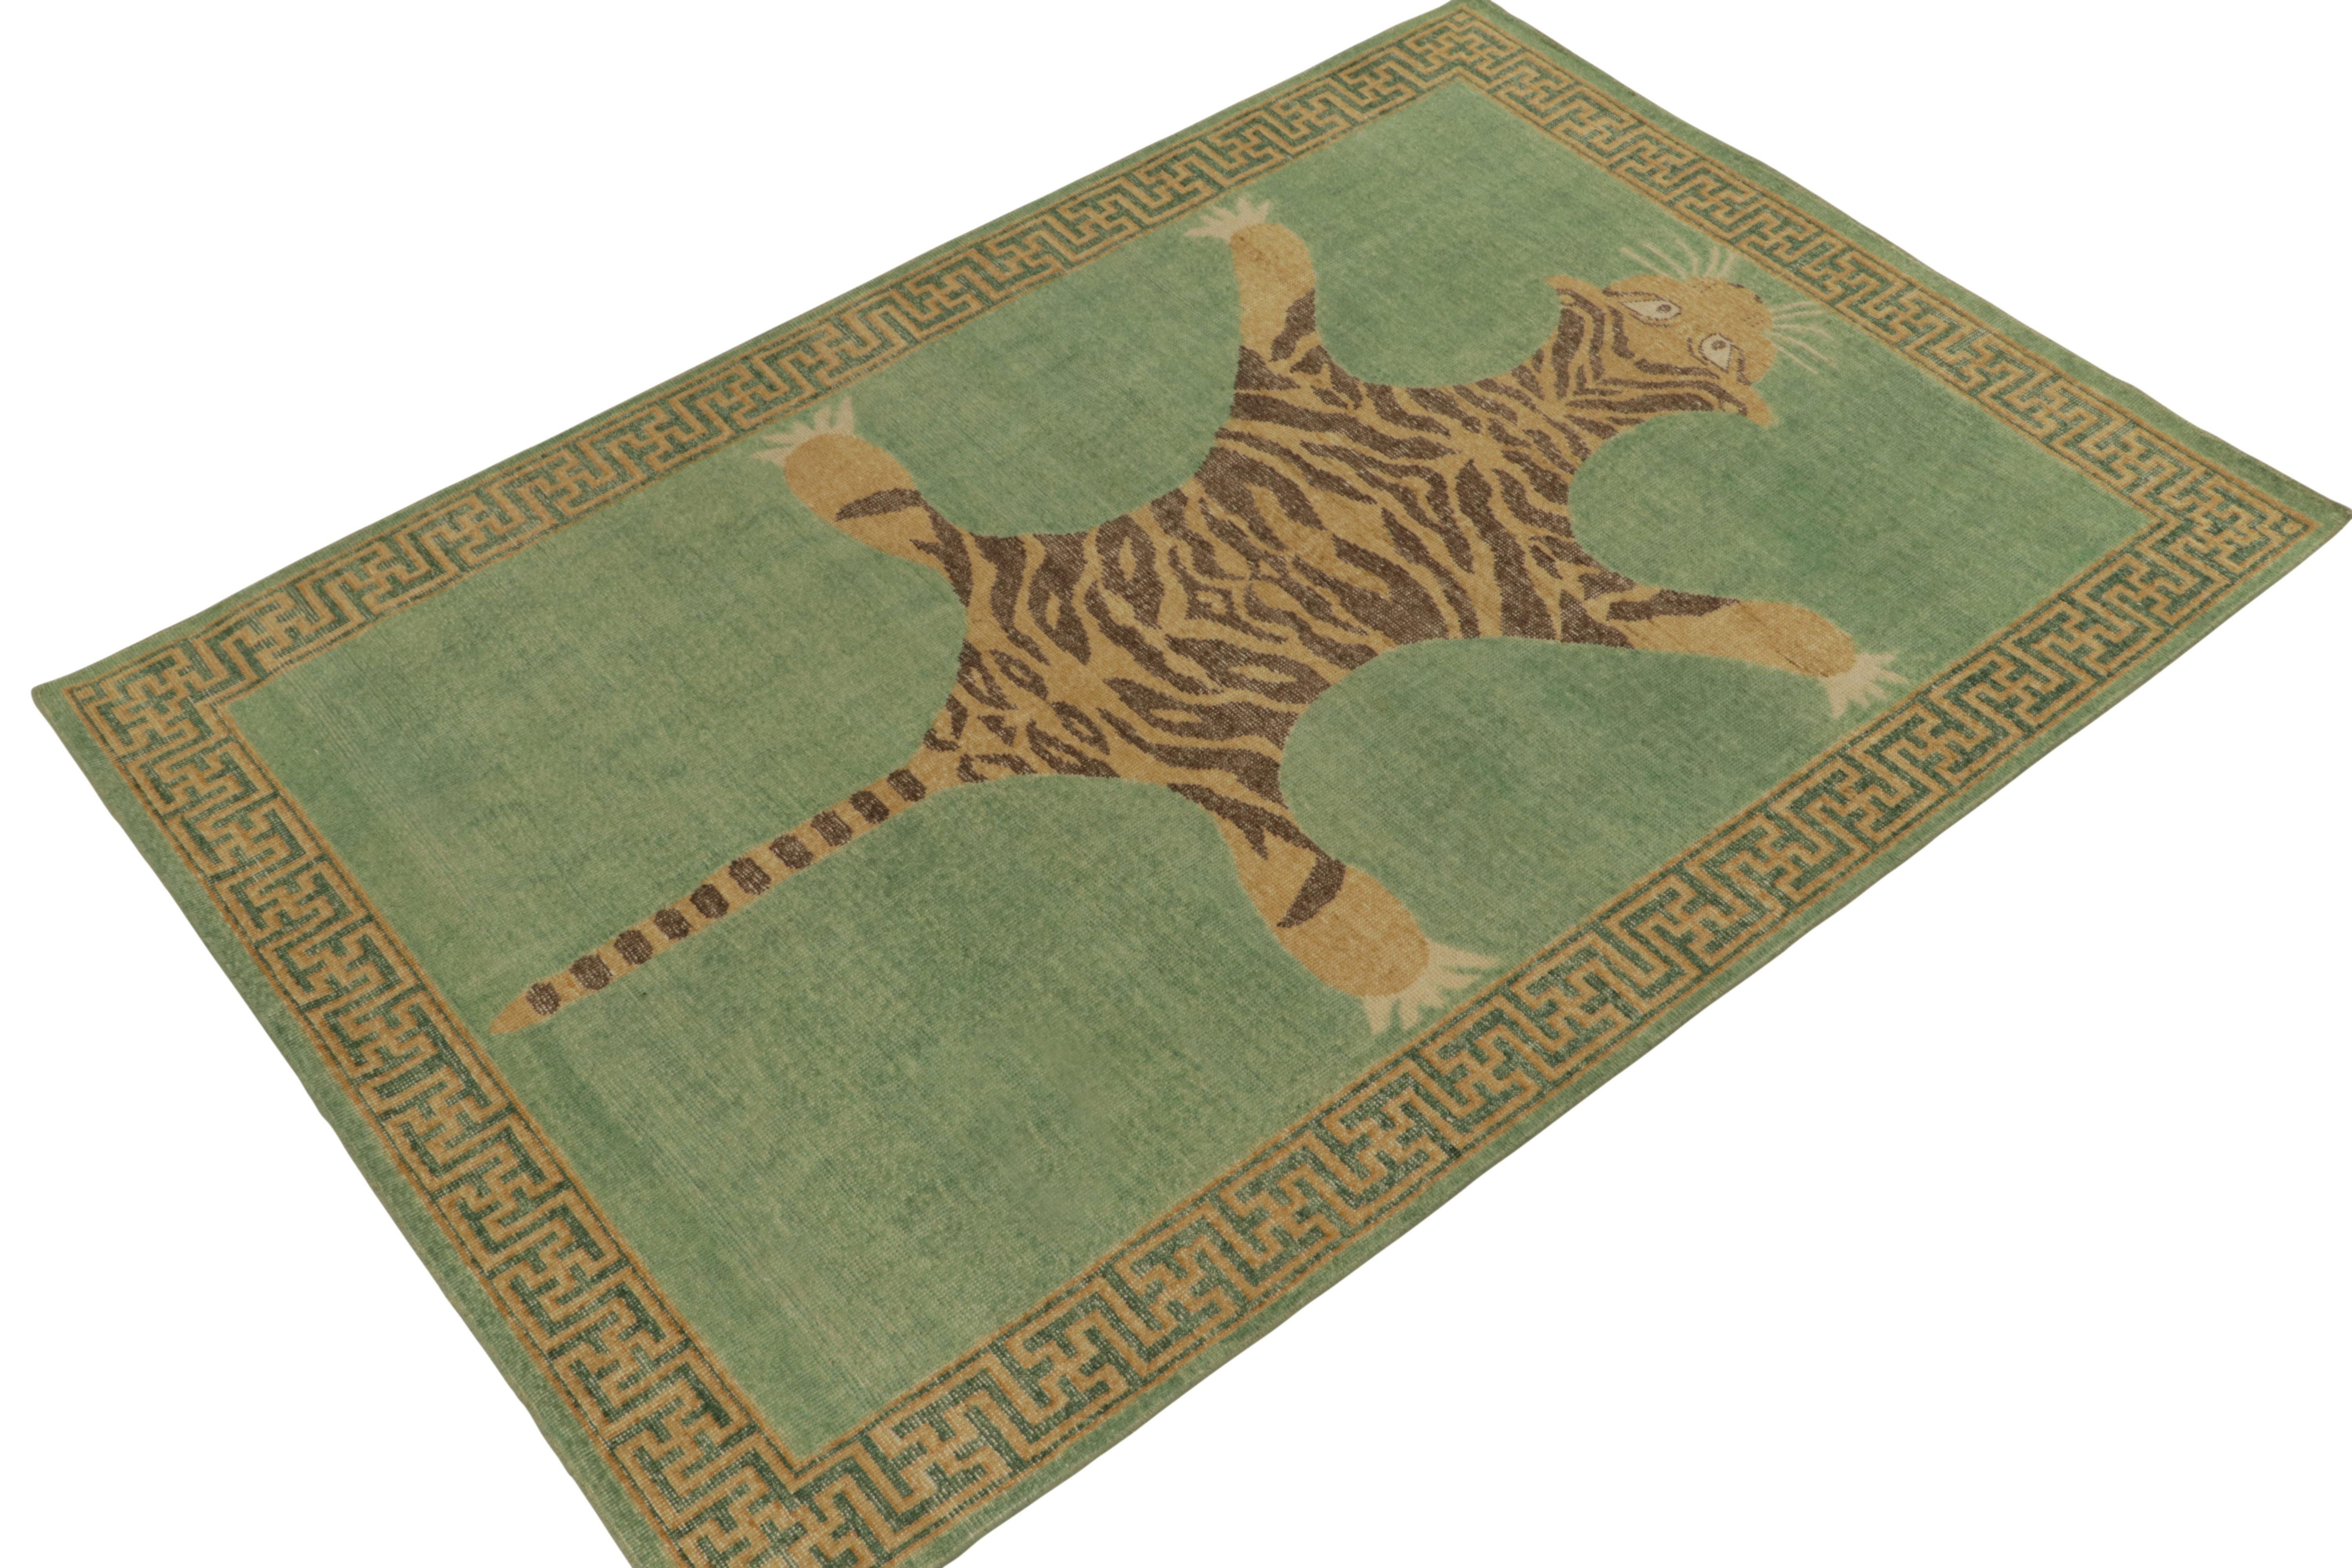 From Rug & Kilim’s Homage Collection, a 6x9 hand-knotted wool piece recapturing the time-honored Tiger skin rug in its glory. 

On the Design: This piece is inspired by antique Indian Tiger-skin rugs of the most regal, inviting presence. Tones of